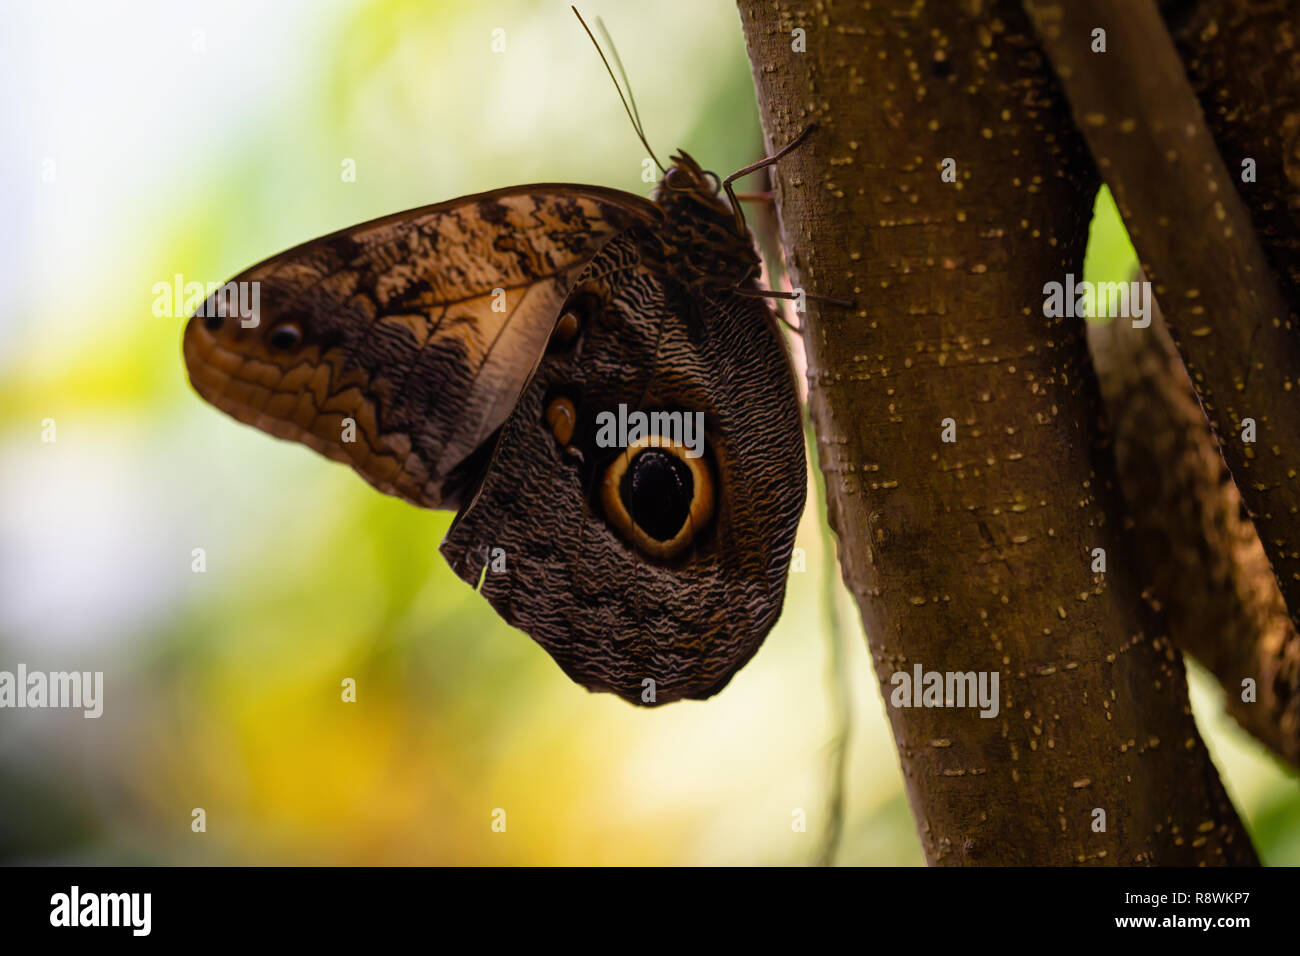 Beautiful macro picture of a butterfly, Caligo memnon, also knowed as the Giant Owl. Place of Origin is Costa Rica, Central American. Stock Photo